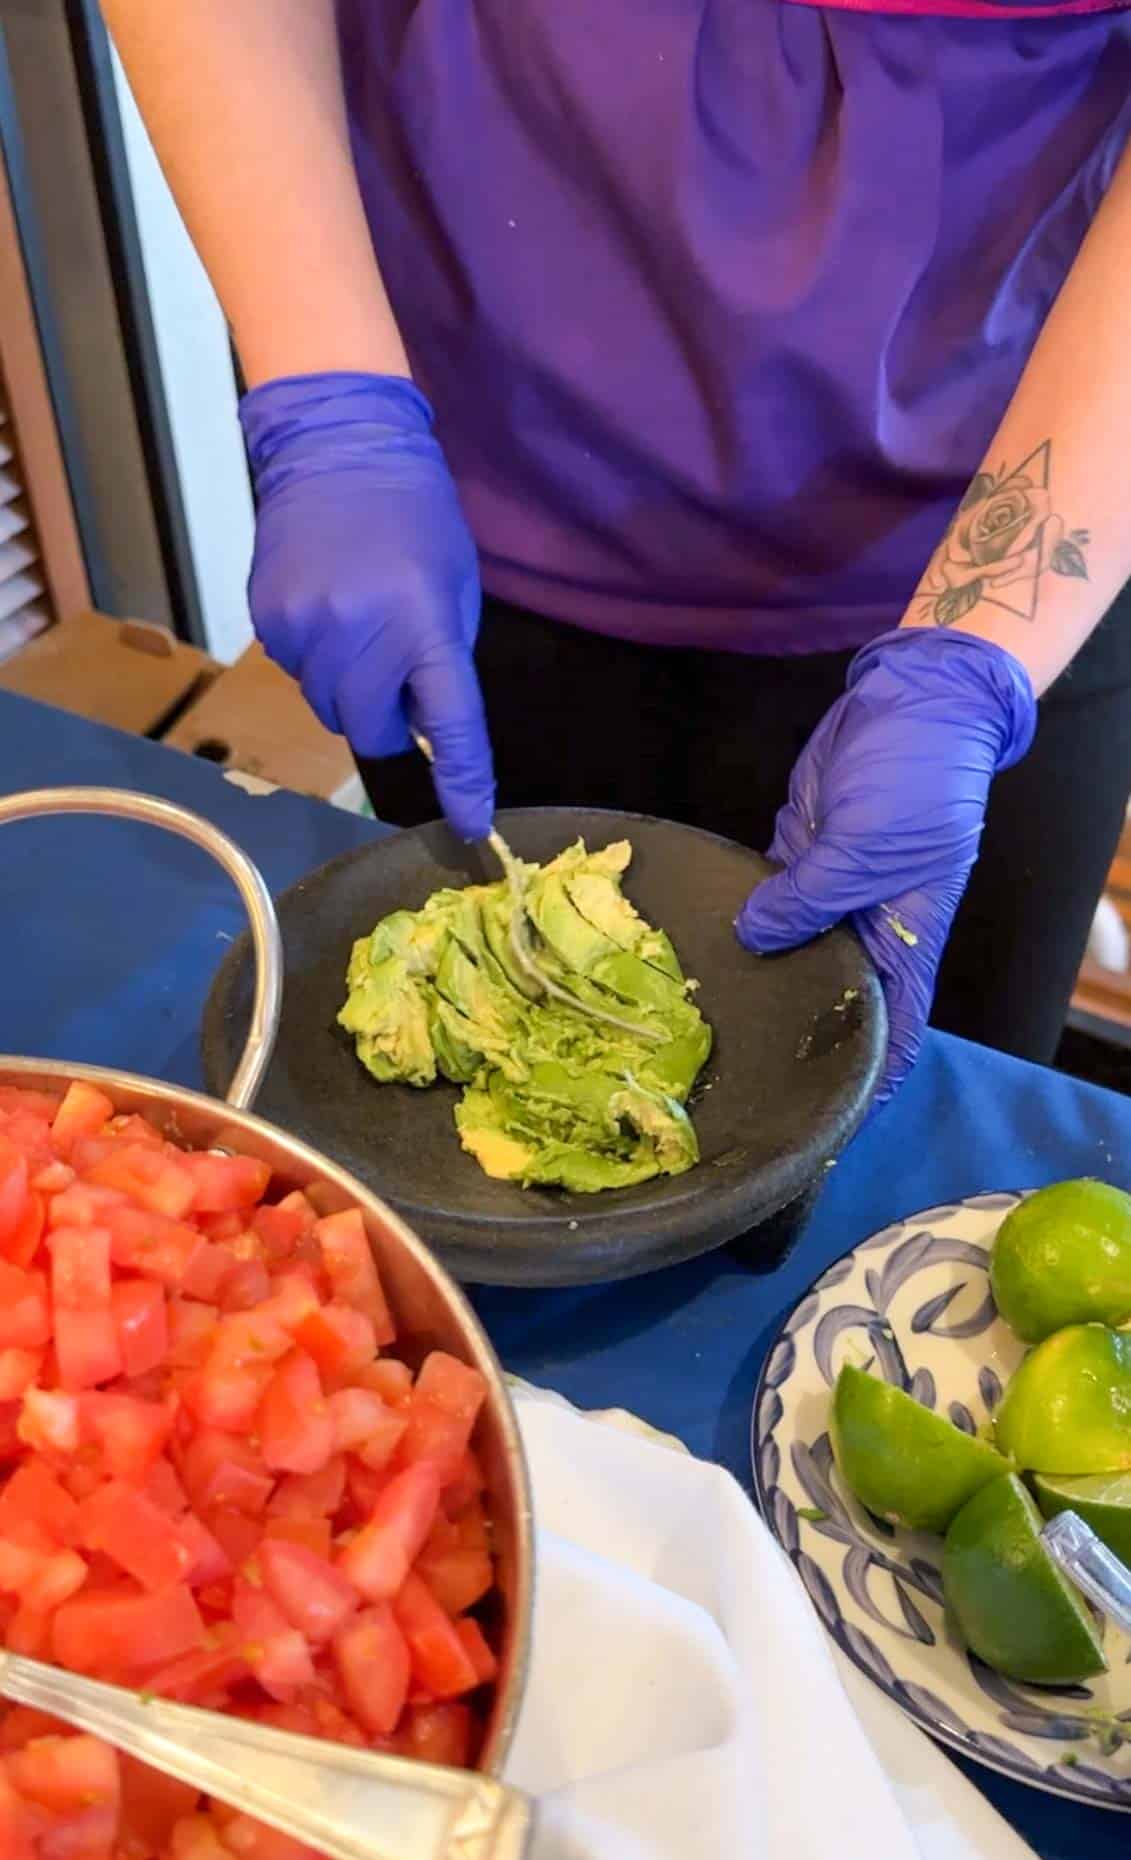 Hands with purple plastic gloves mashing avocado in a black bowl with a fork on a blue tablecloth.